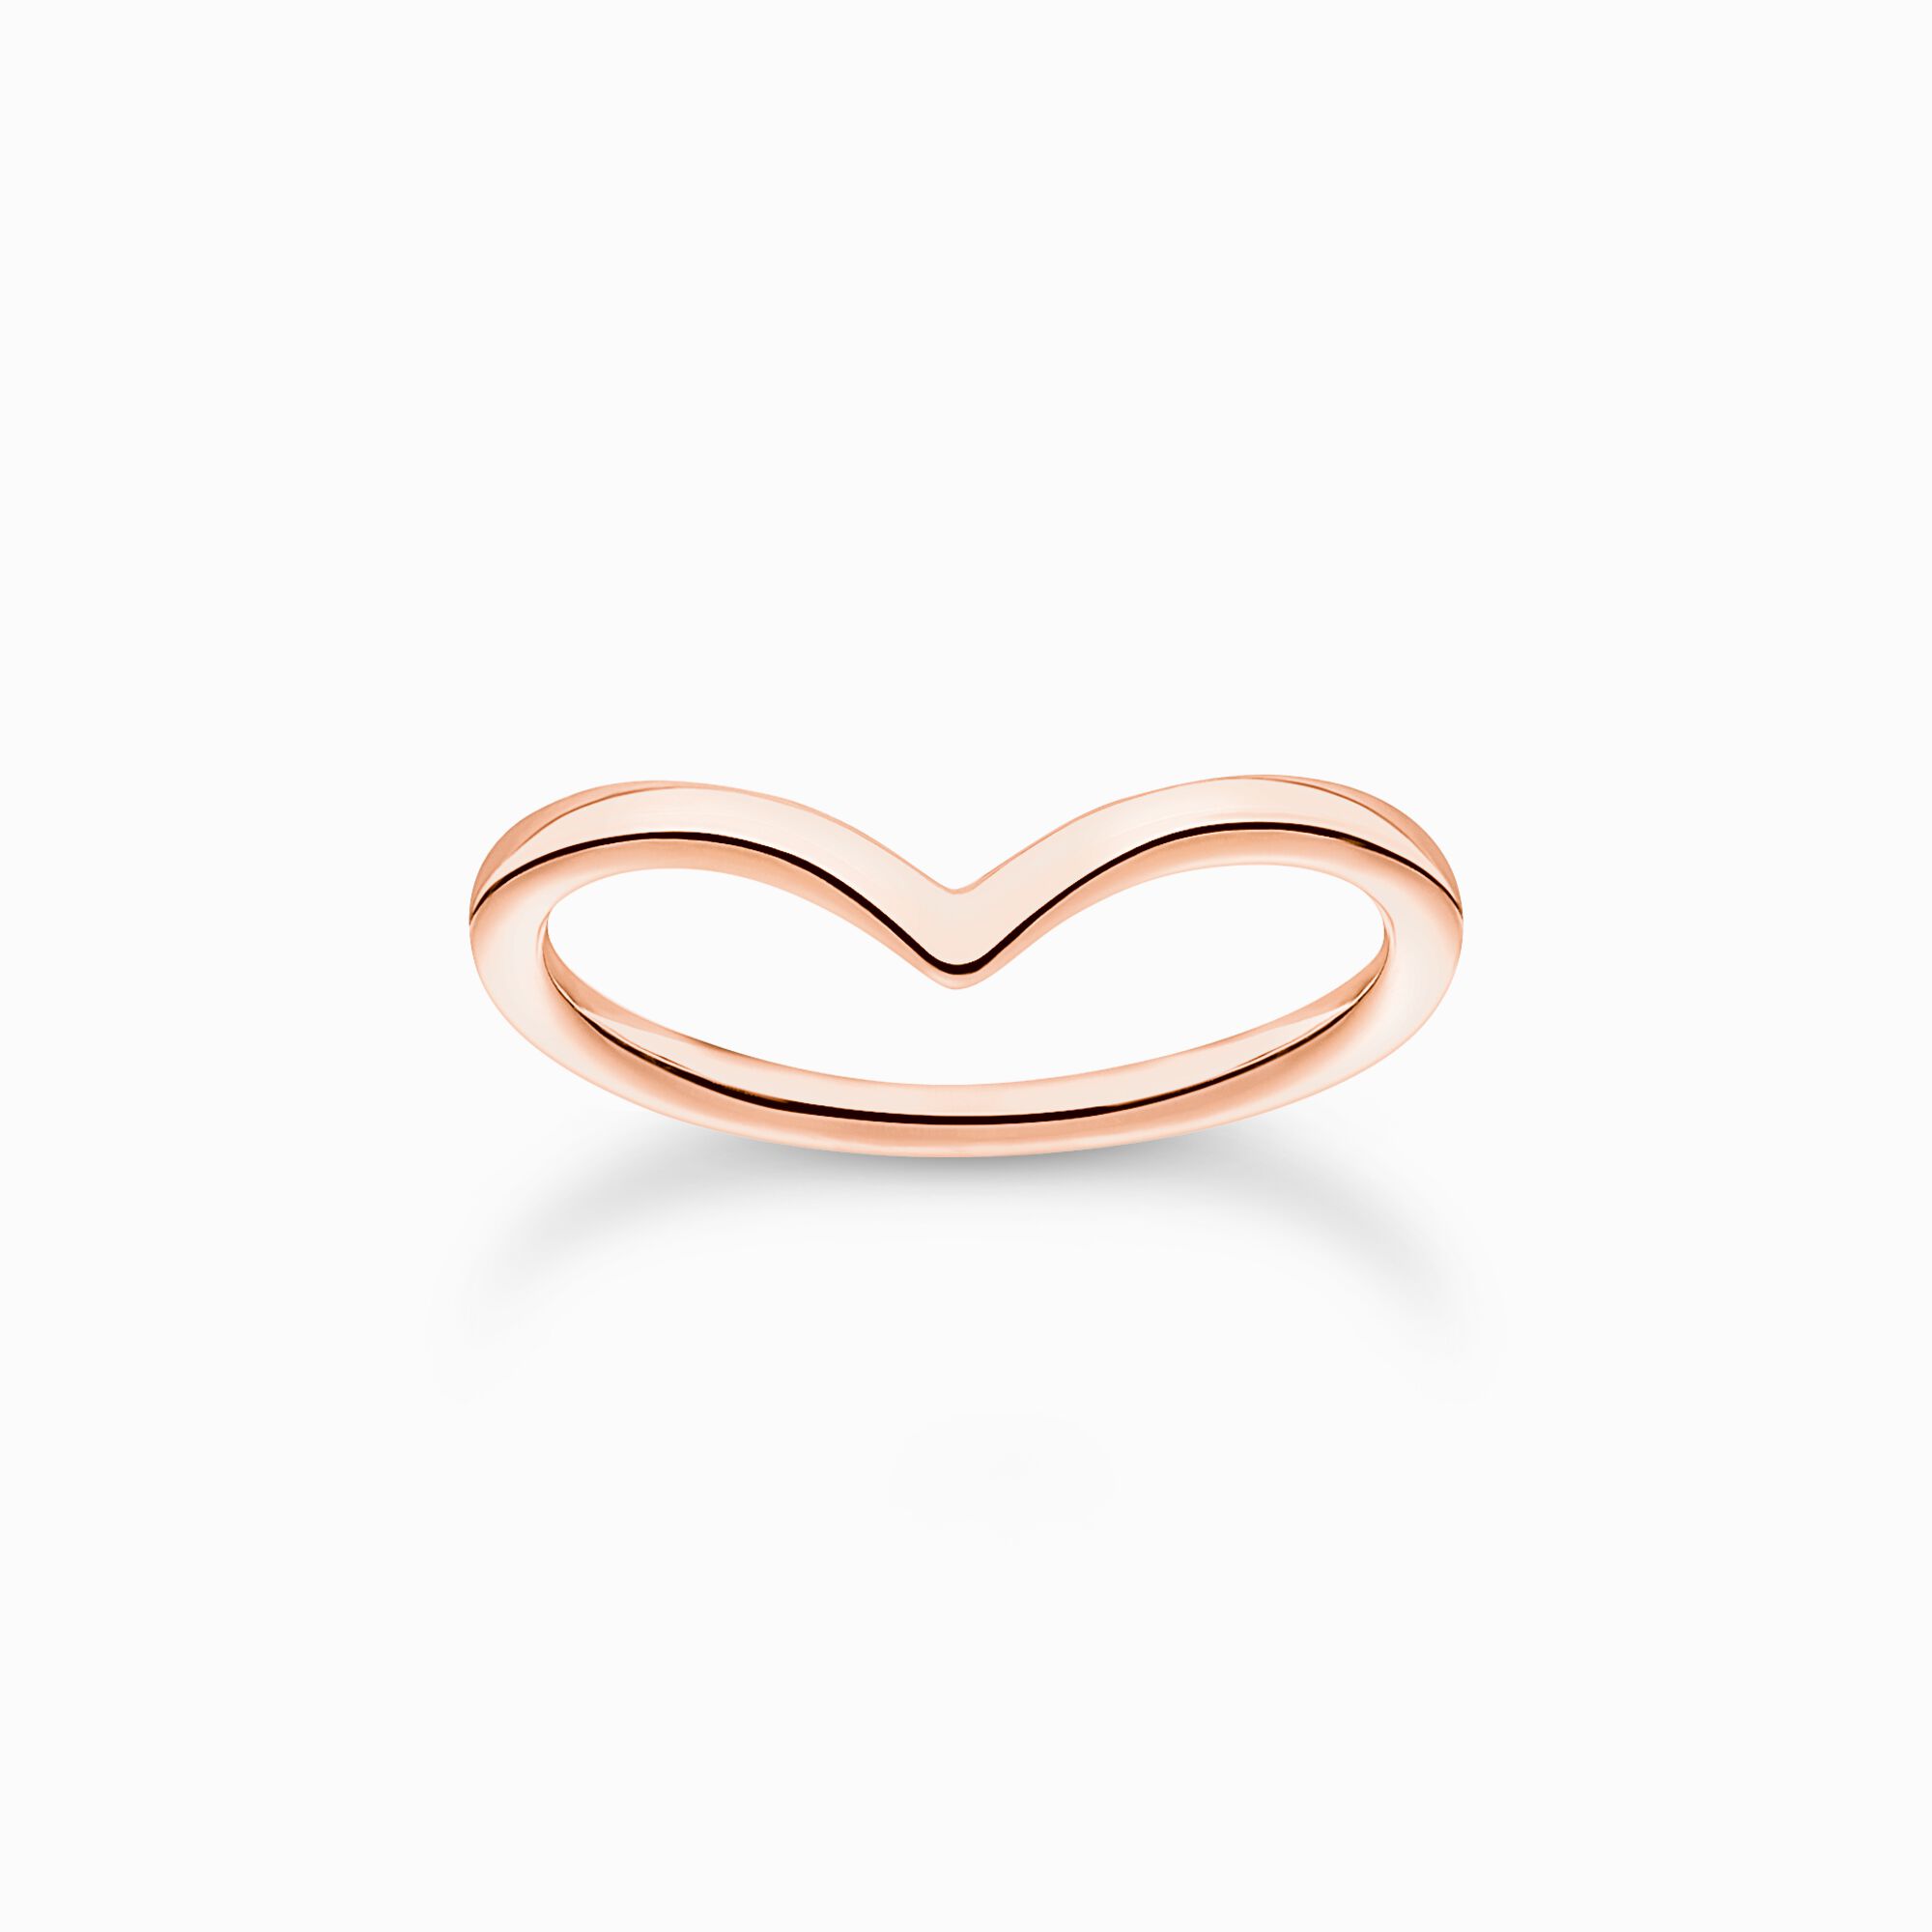 Ring V-shape rose gold from the Charming Collection collection in the THOMAS SABO online store